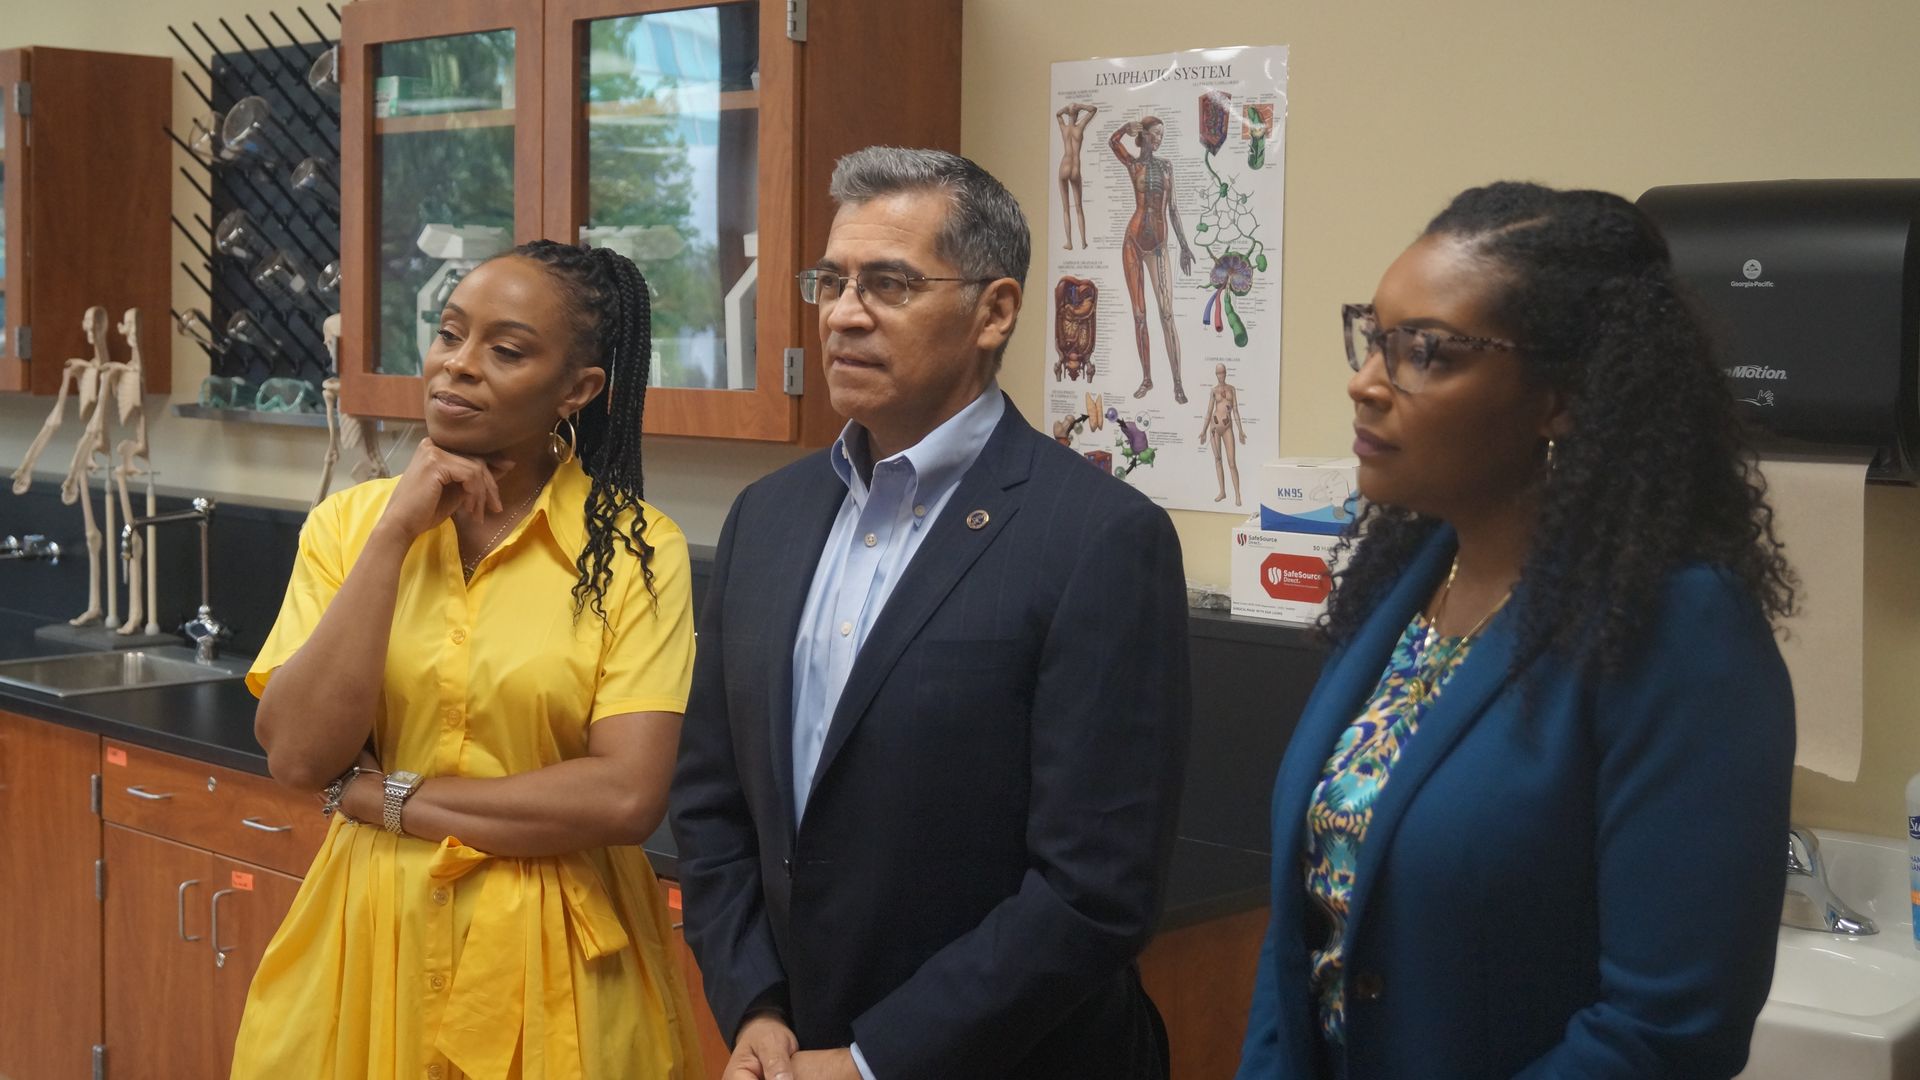 Secretary Xavier Becerra, flanked by Rep. Shontel Brown (L) and Rep. Emilia Sykes (R)